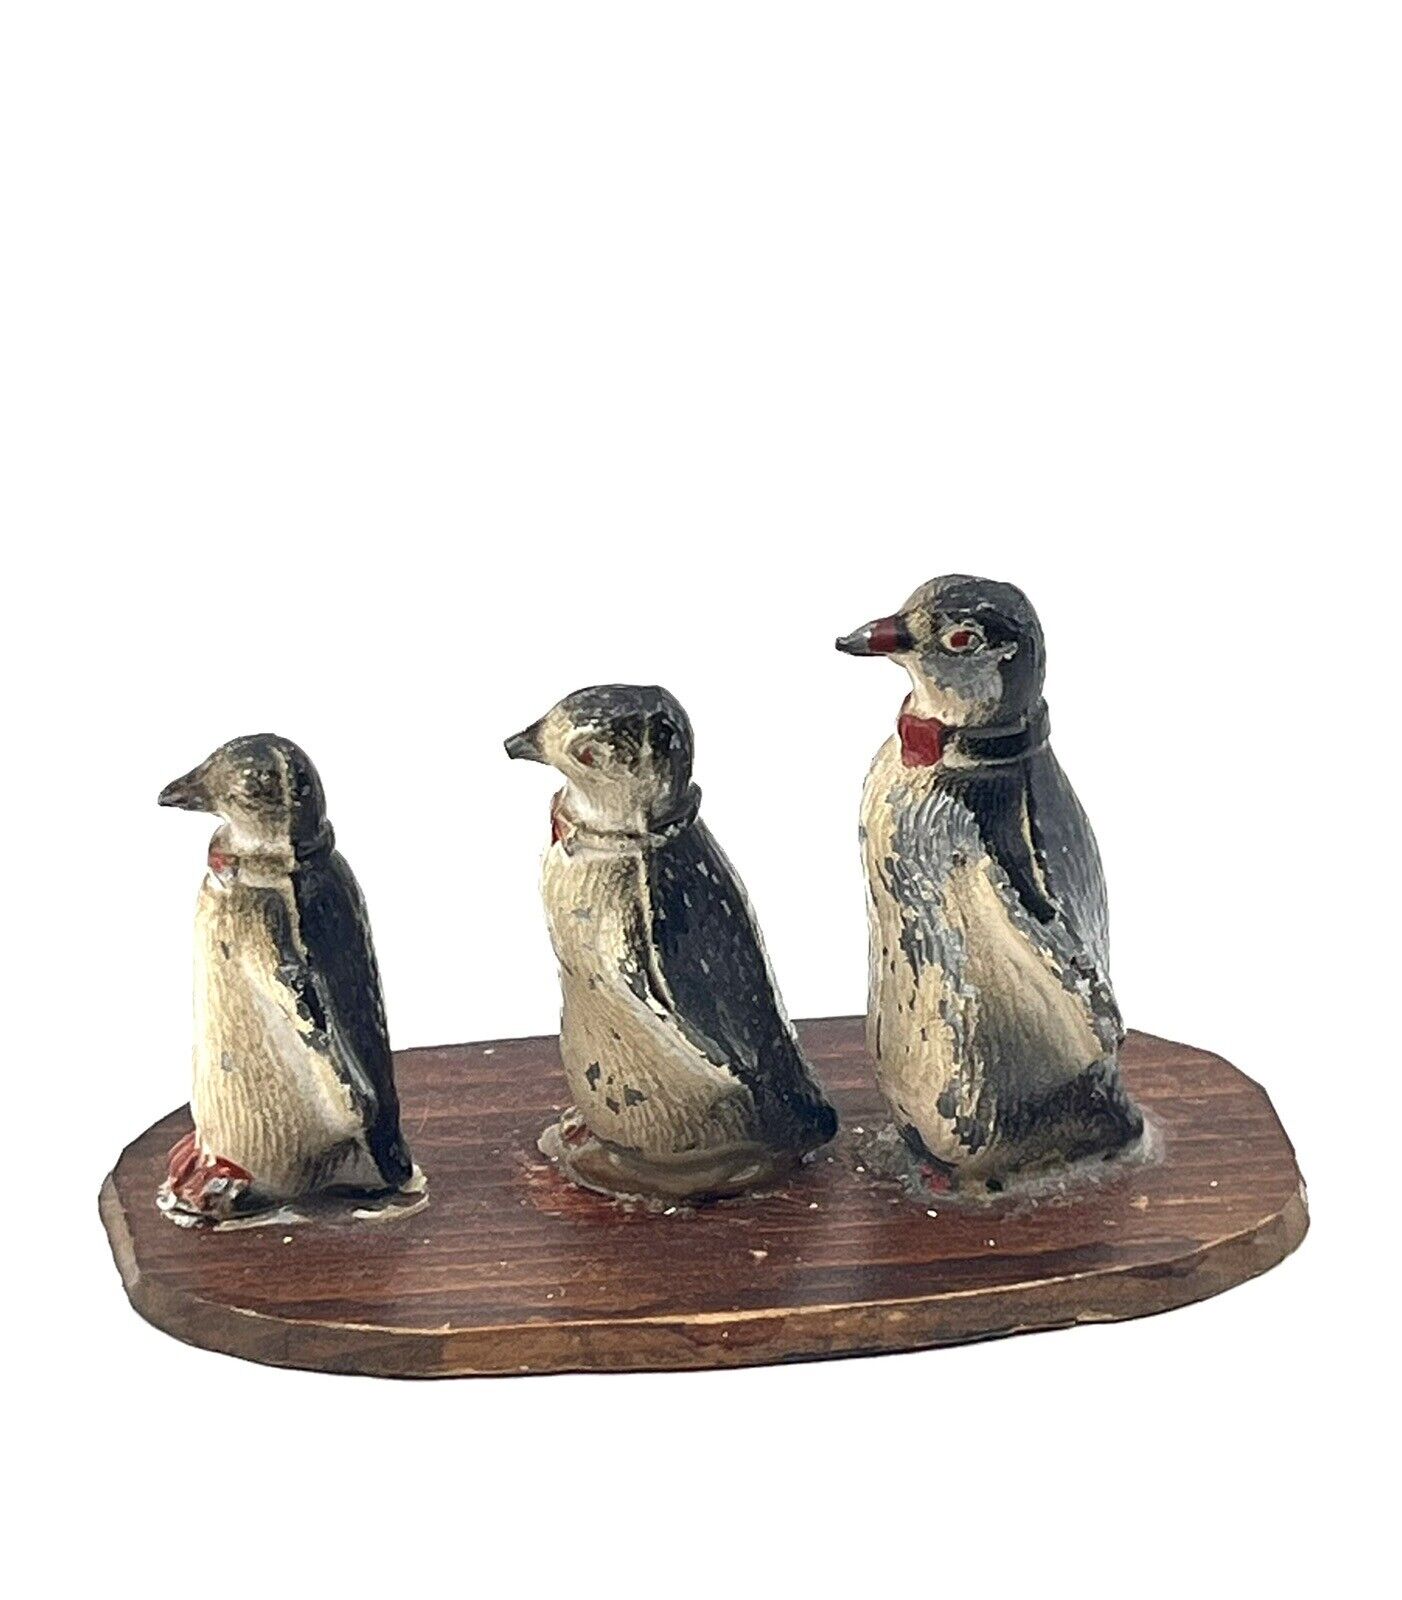 Antique Set of PENGUINS on Wood Piece-1920\'s-30\'s- Pewter?-Has Wear-SEE PHOTOS